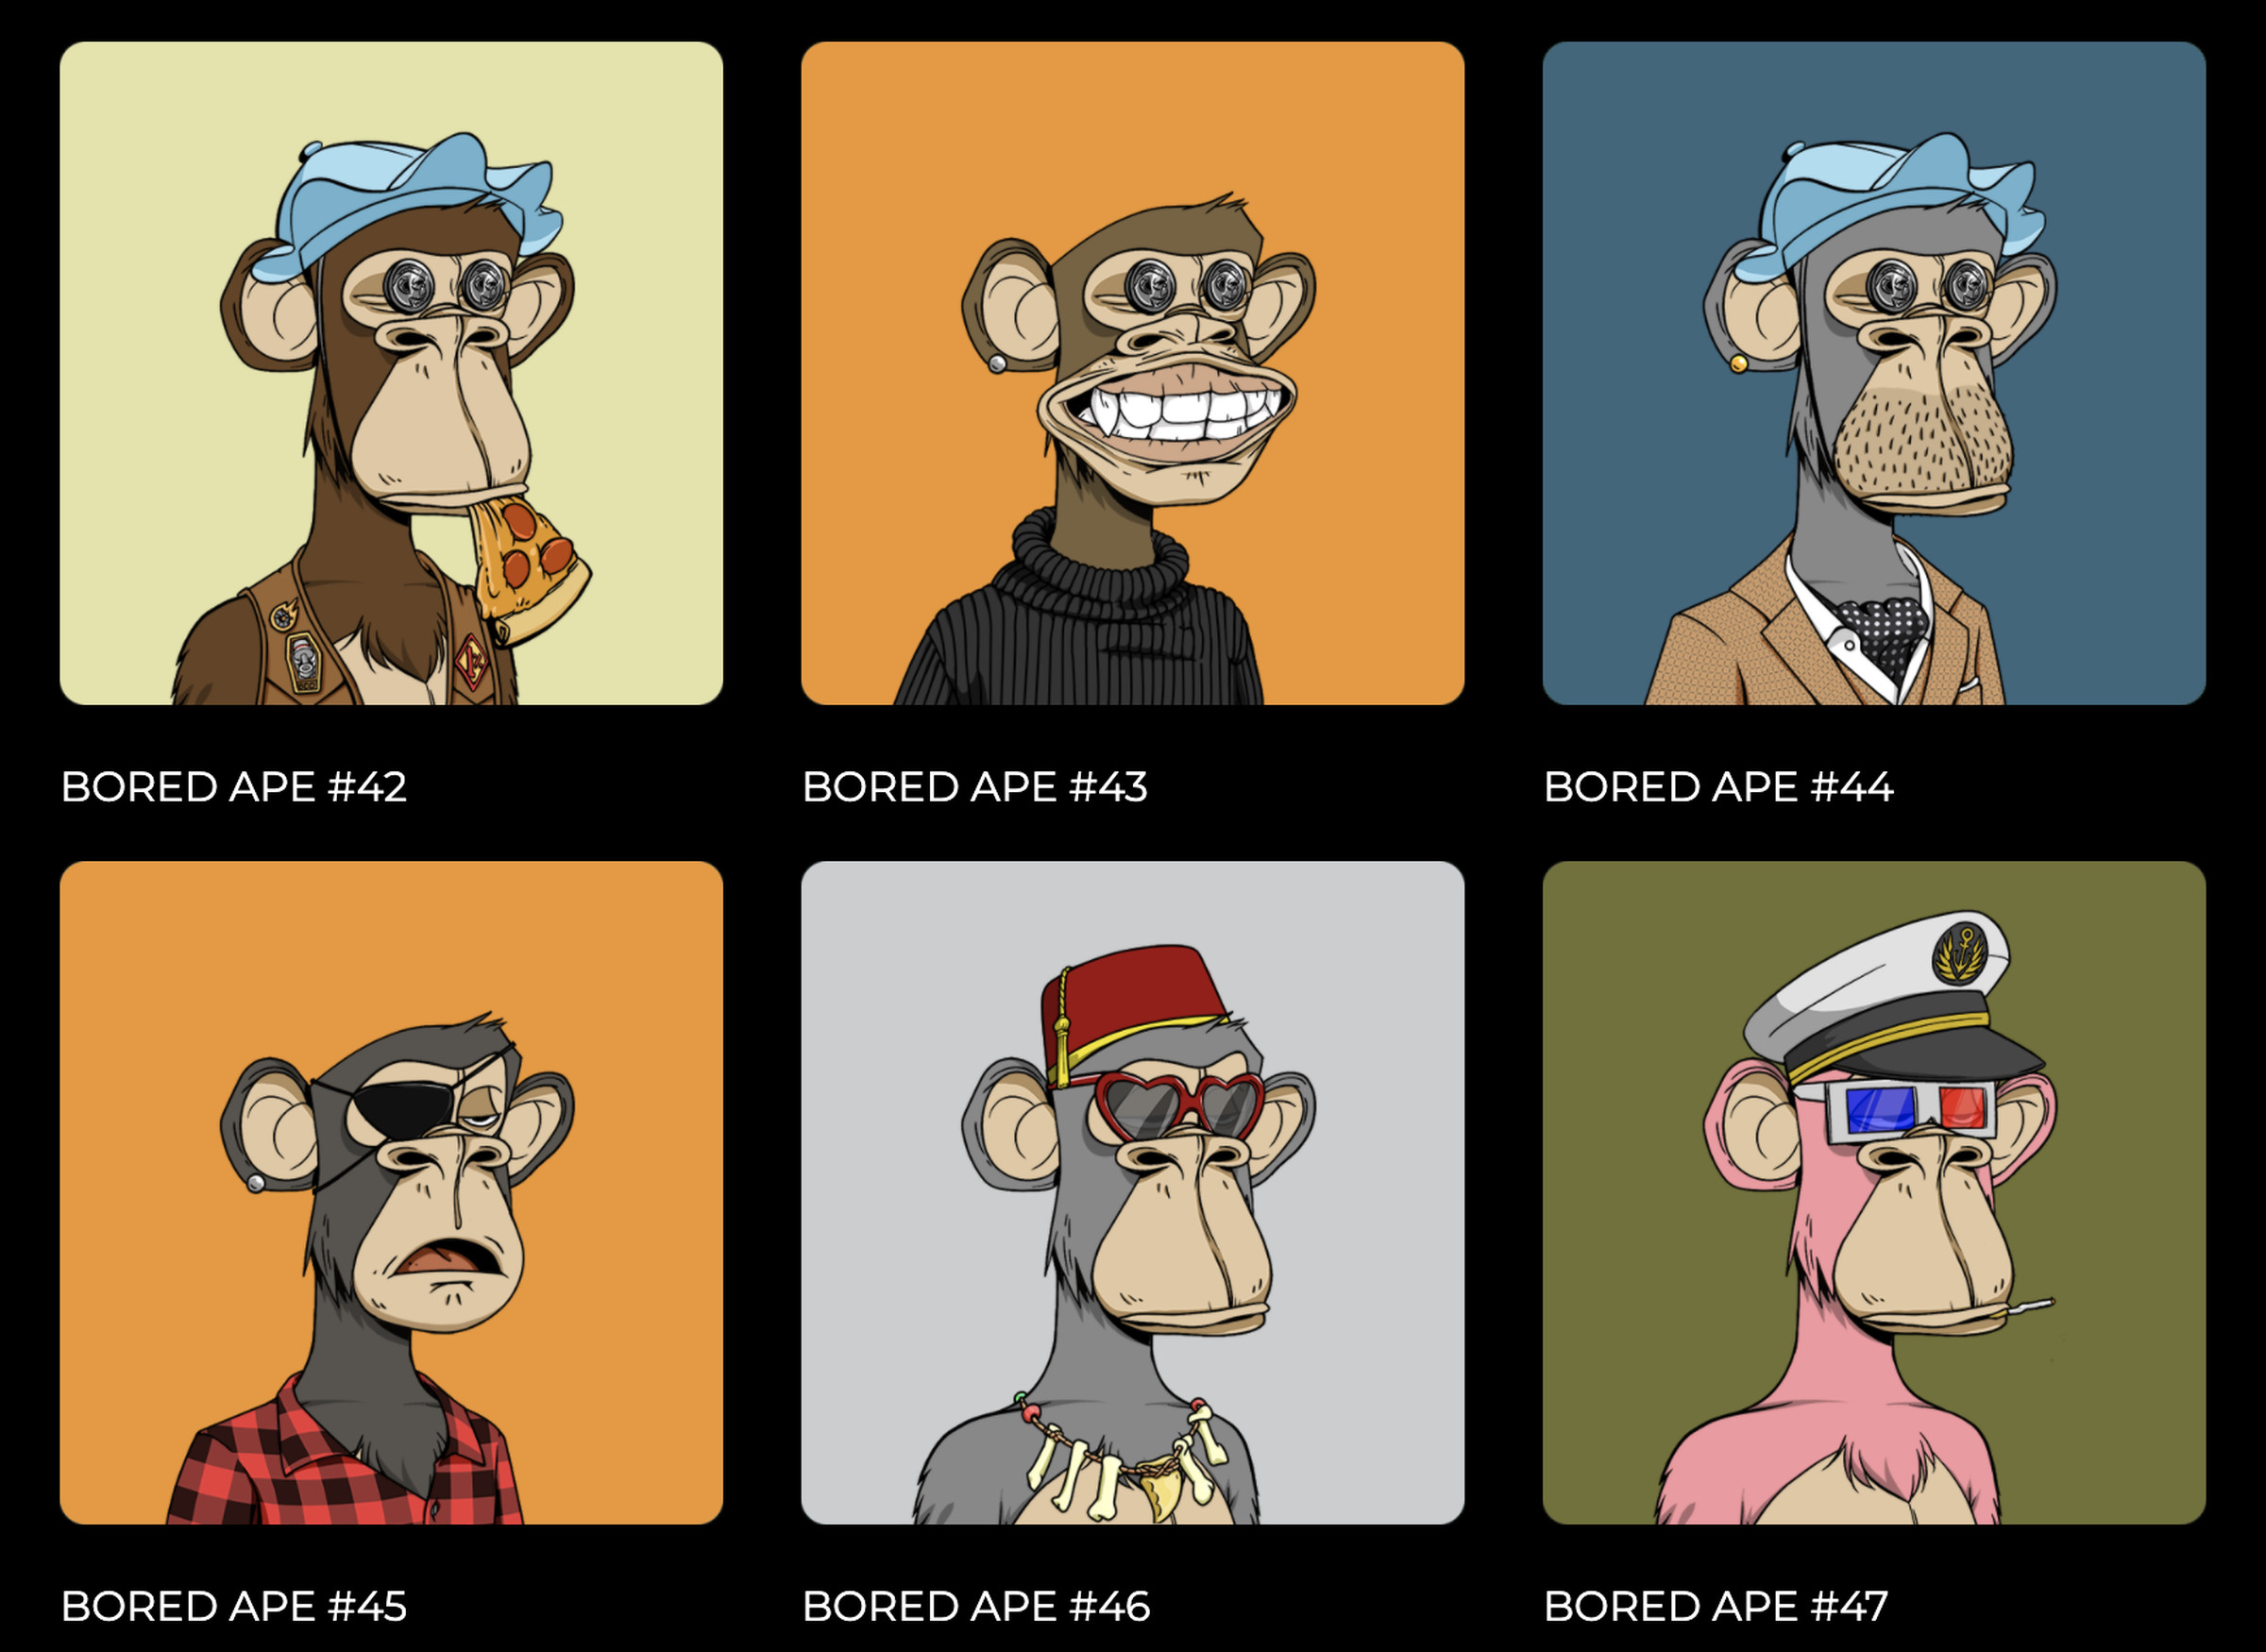 Six apes wearing different clothes and accessories. One has pizza in its mouth, another wears a flannel, another has 3D glasses.